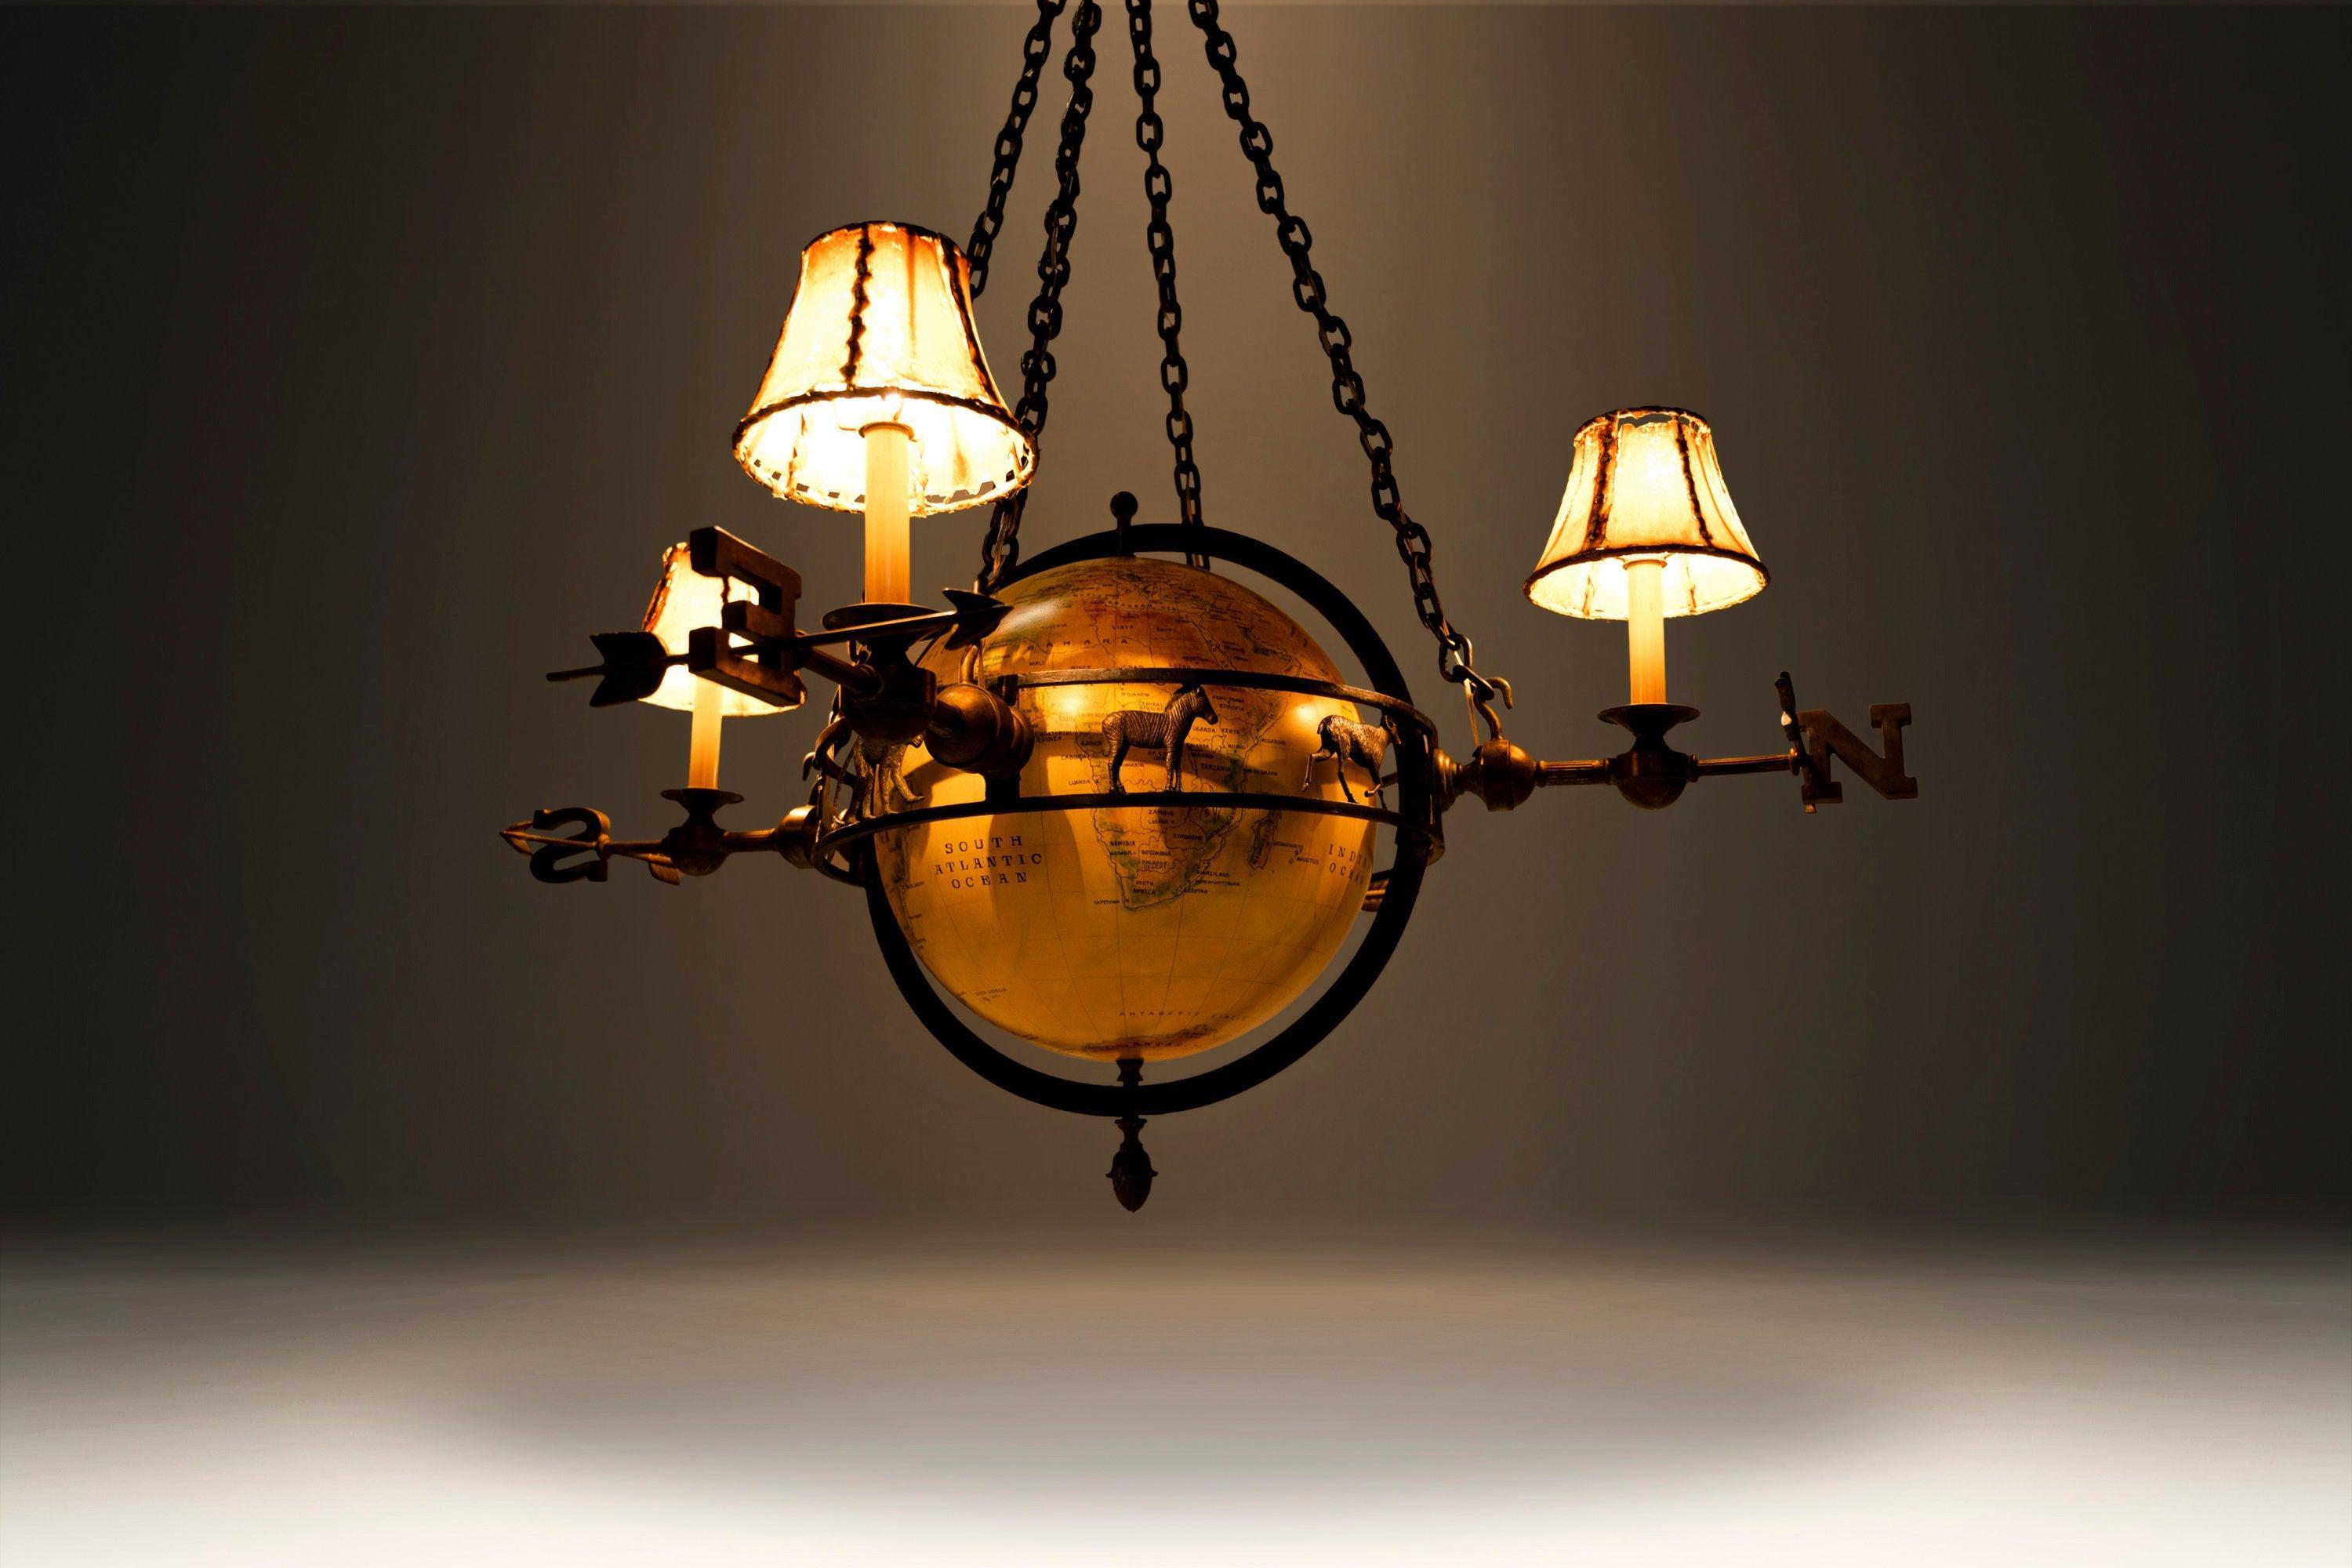 Attention collectors! This truly extraordinary chandelier, made by Maitland-Smith, is the epitome of 'Safari'. In 100% original, vintage condition and constructed of perfectly patinaed solid brass this one of a kind piece is sure to make a BOLD